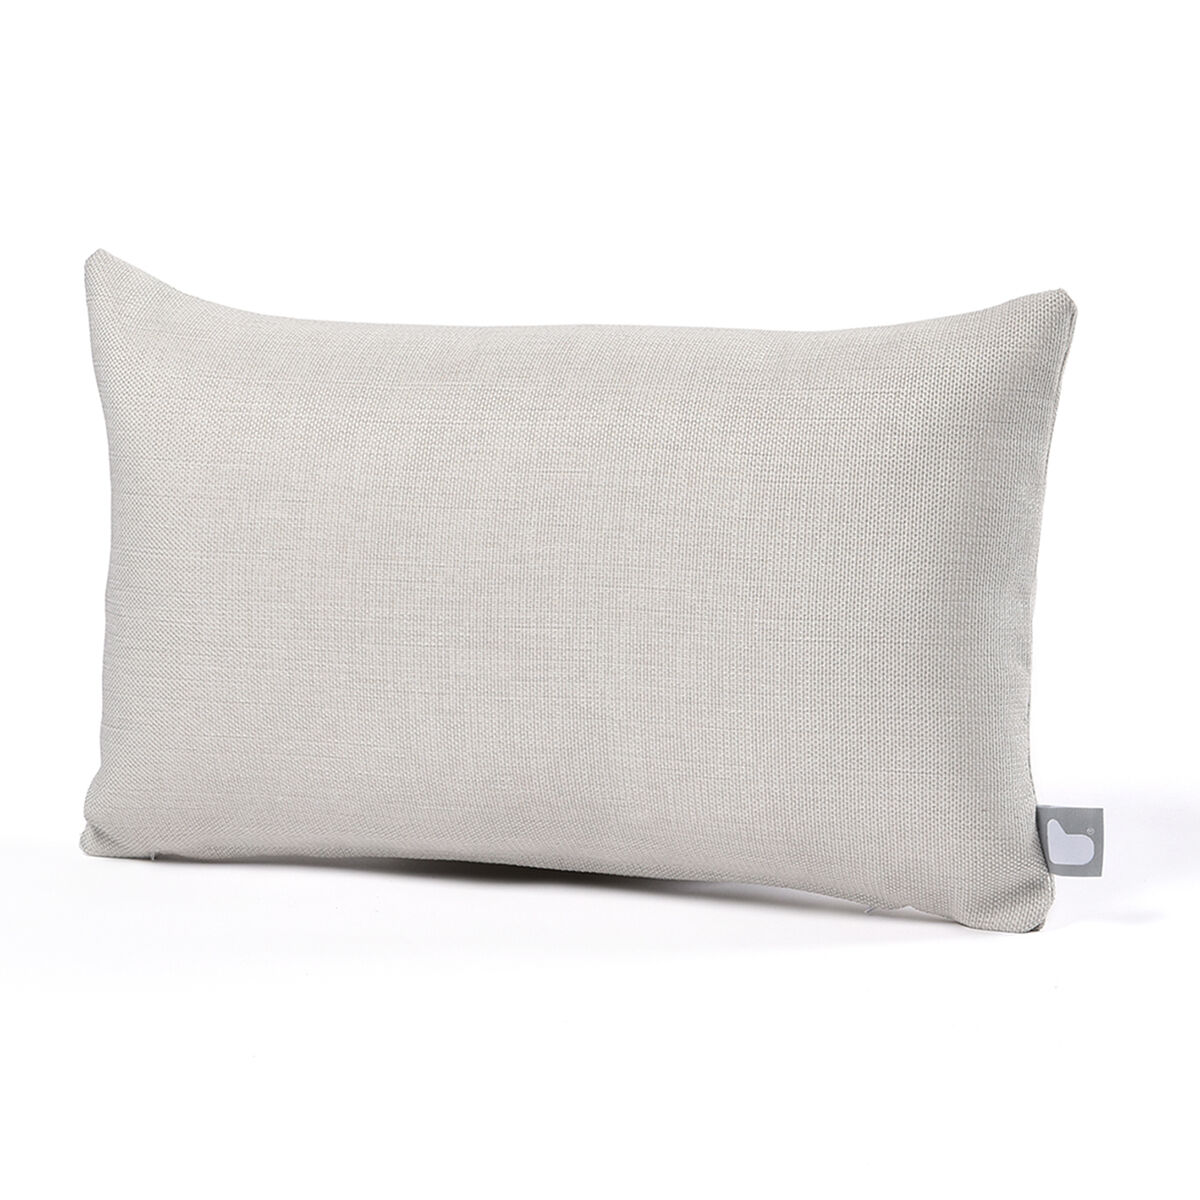 Maze - Pair of Outdoor Bolster Cushions (30x50cm) - Hermes Cream product image